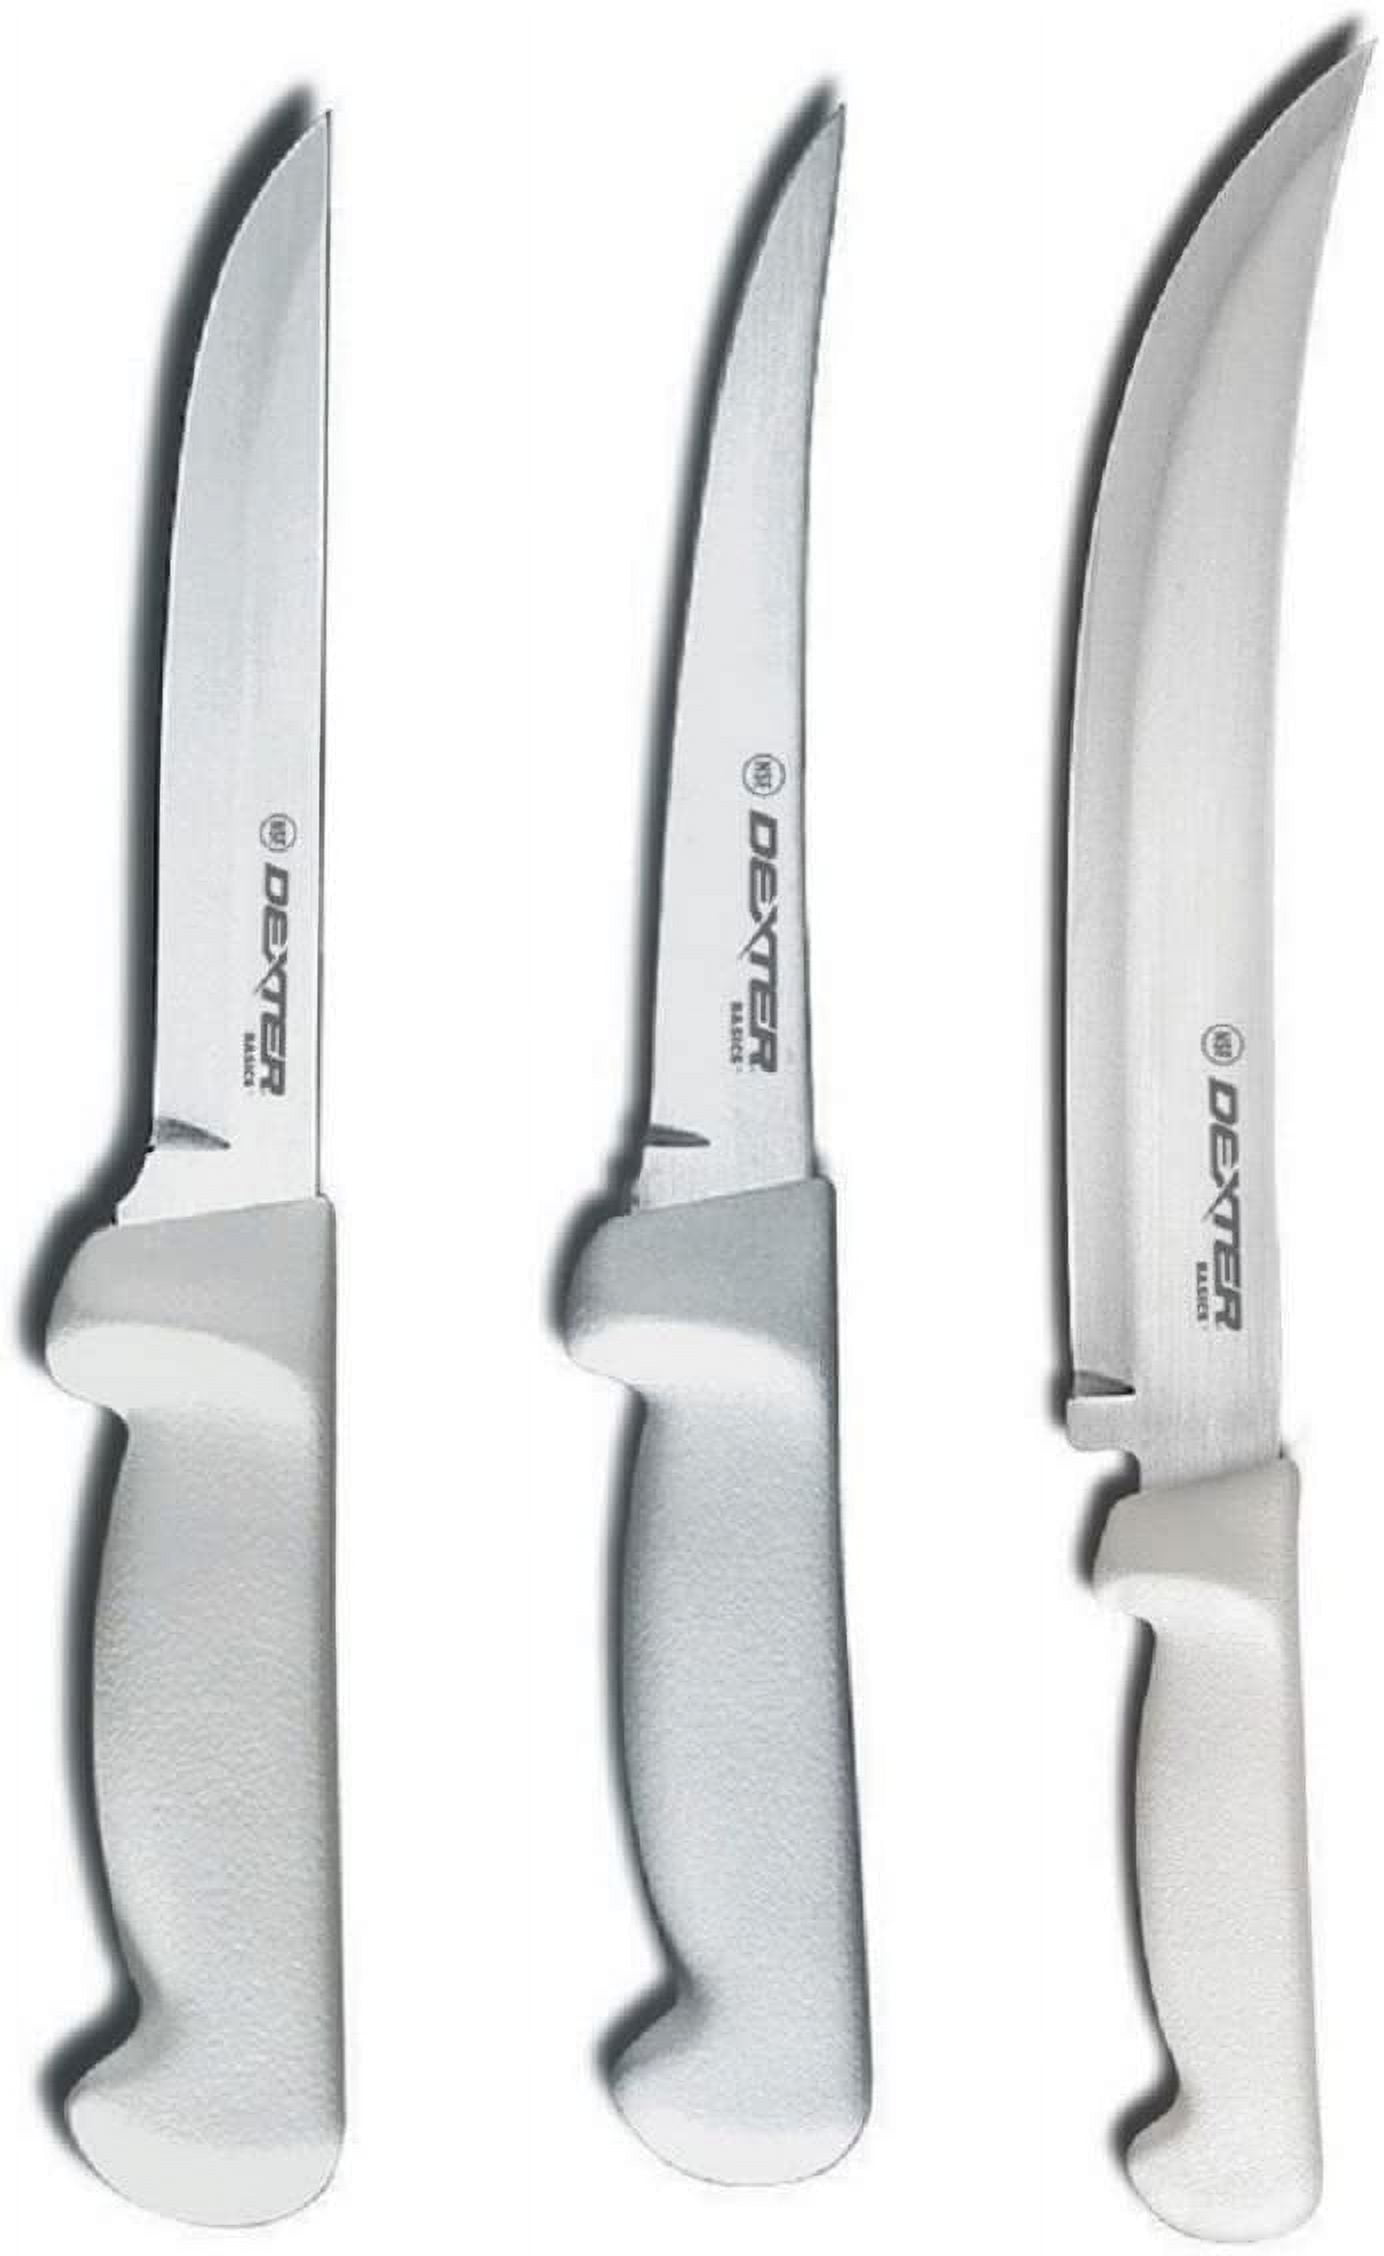 The Dexter Russell 3 Piece Knife Combo Set - Cutlery Butcher Chef